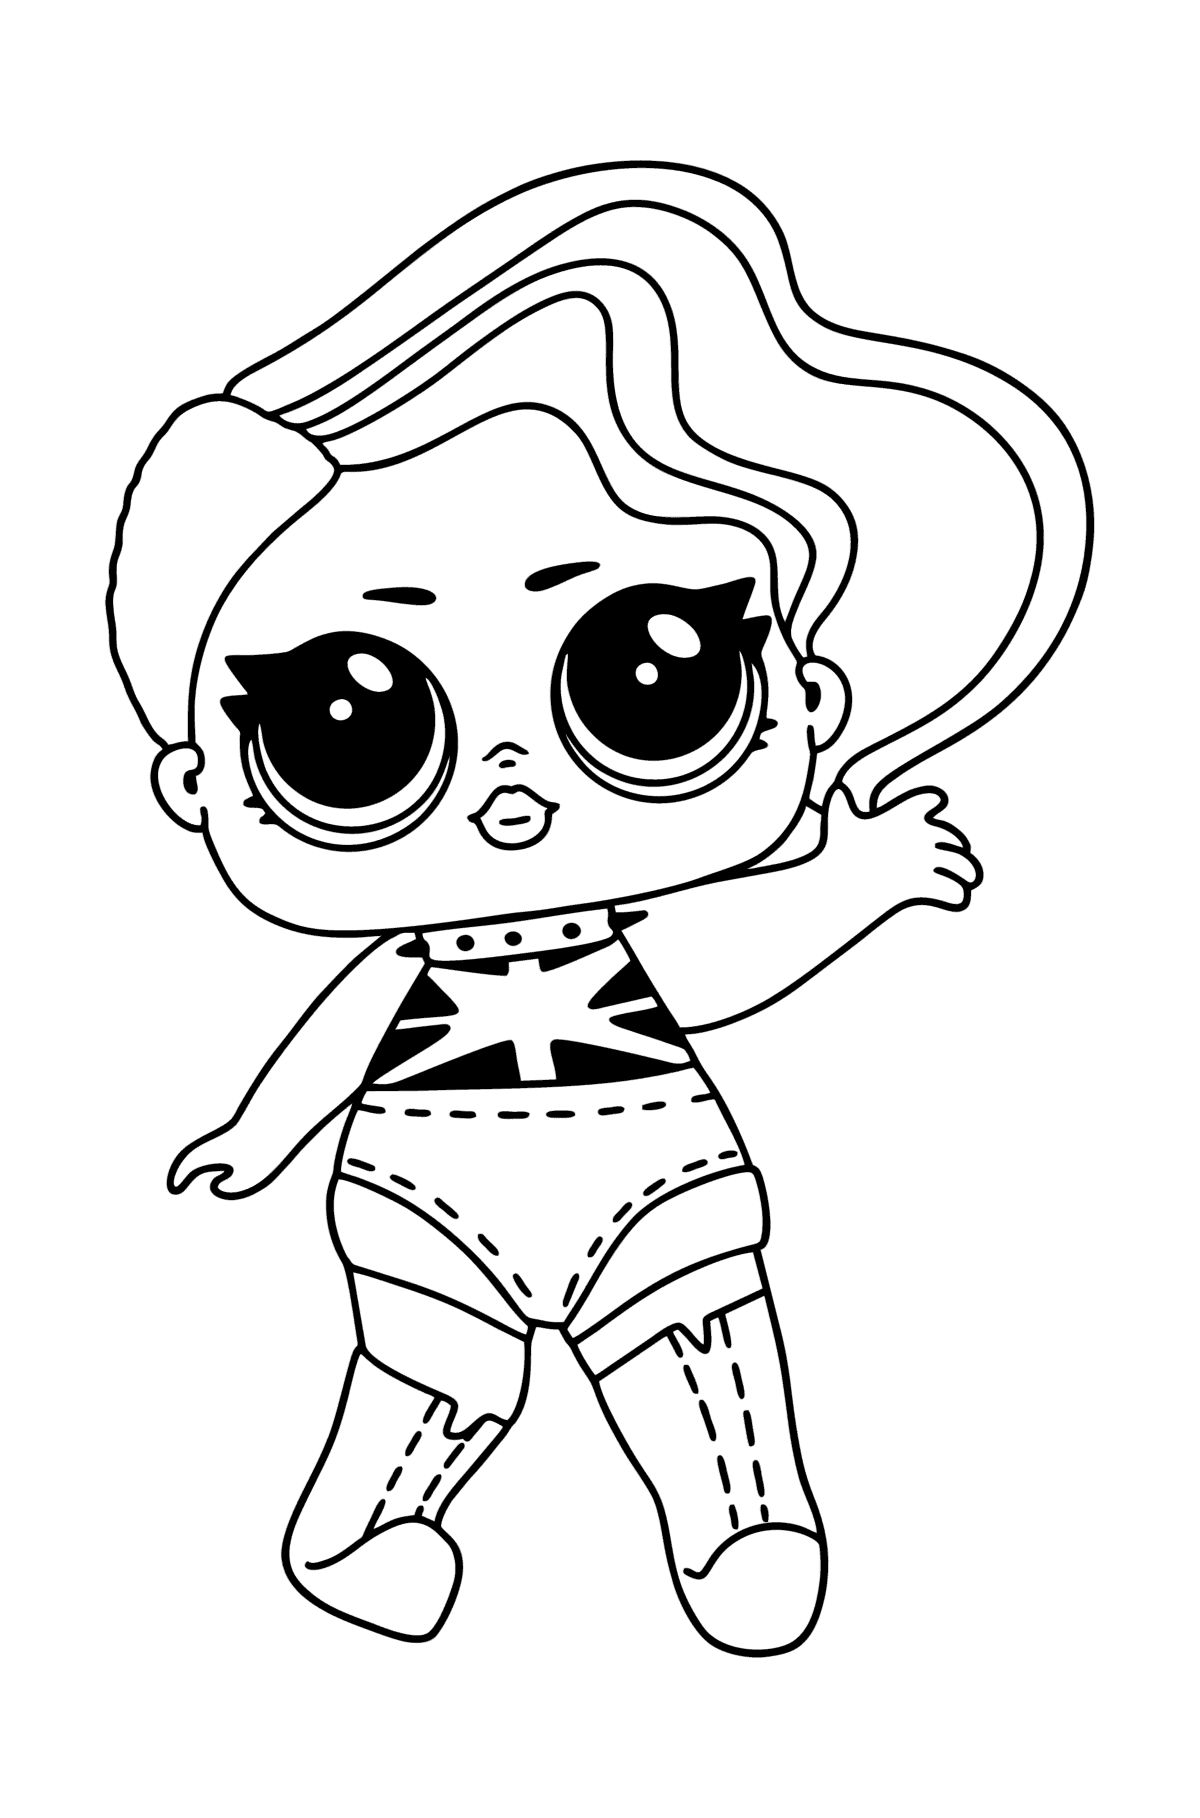 LOL Surprise Cheeky babe coloring page ♥ Online and Print for Free